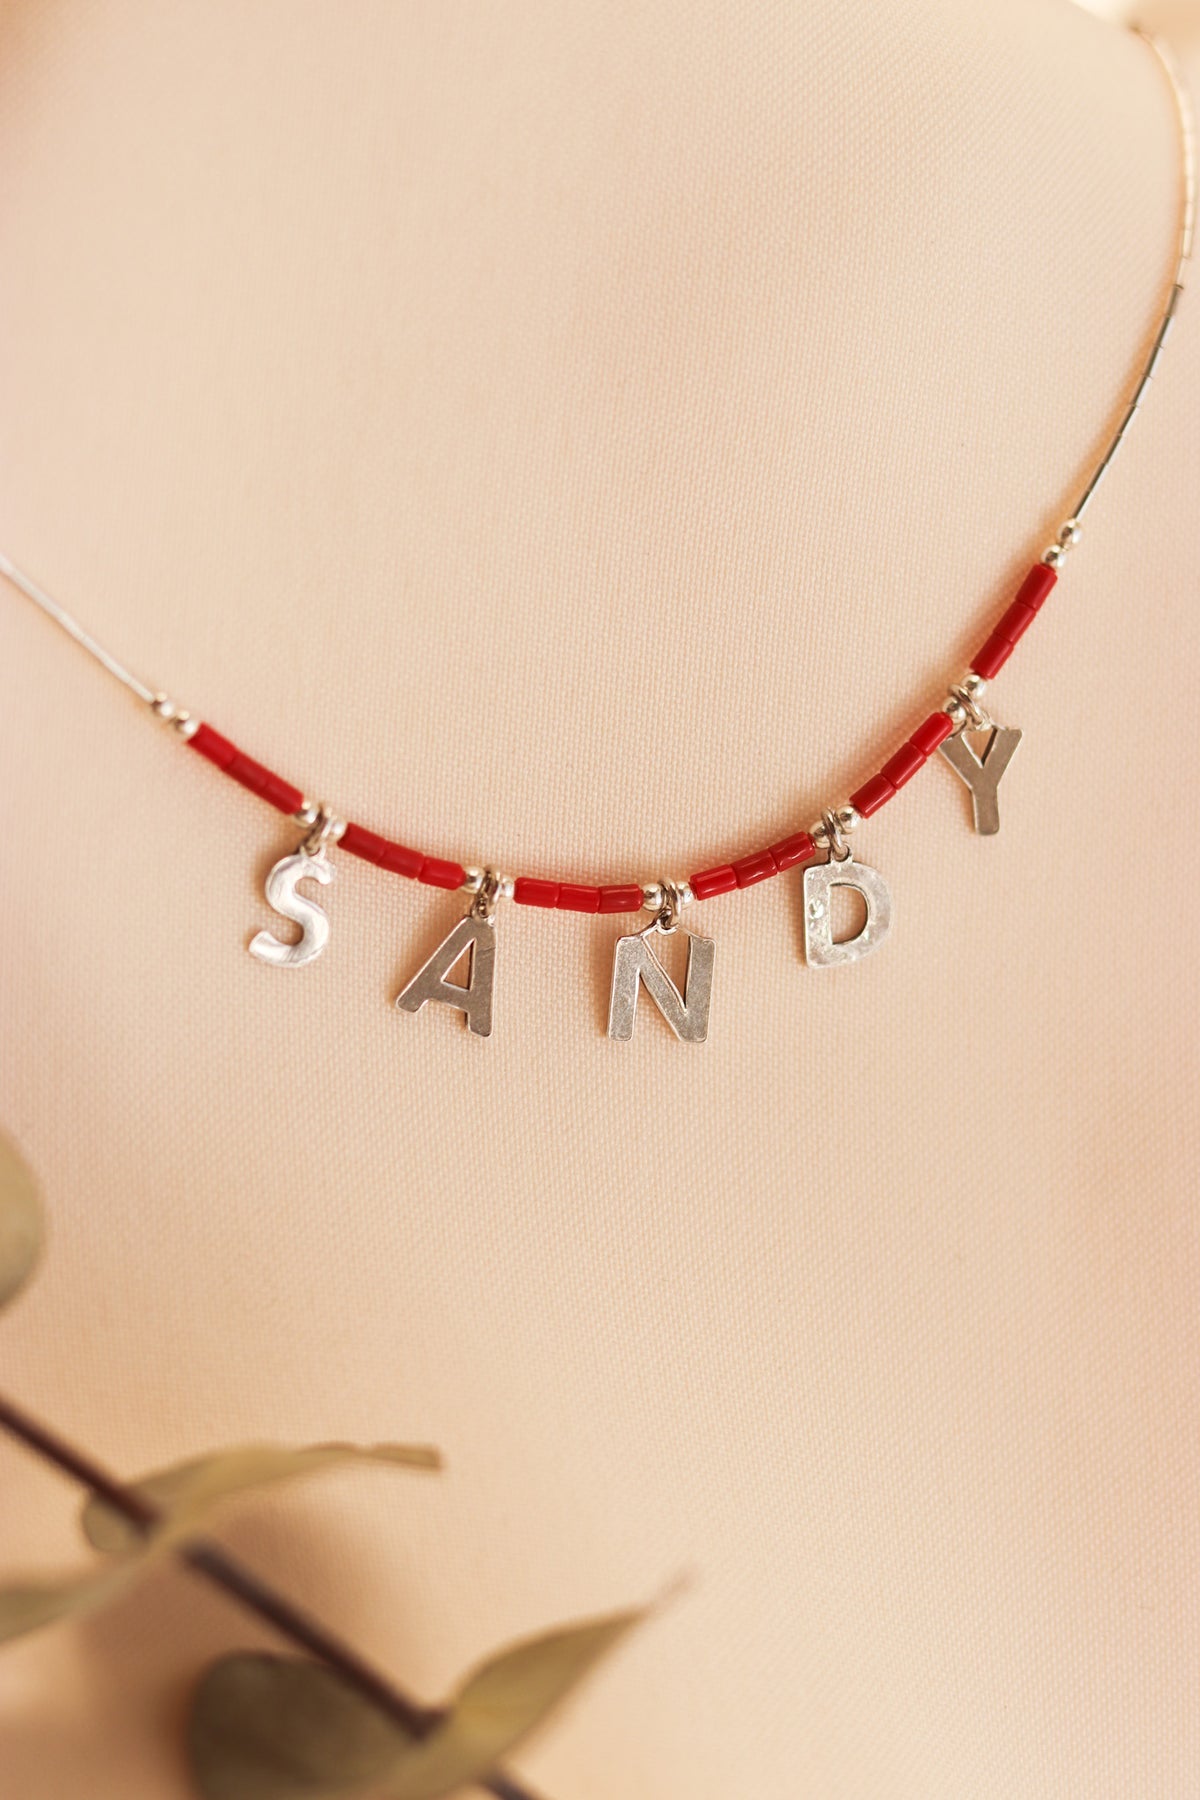 Custom name letters necklace with beads